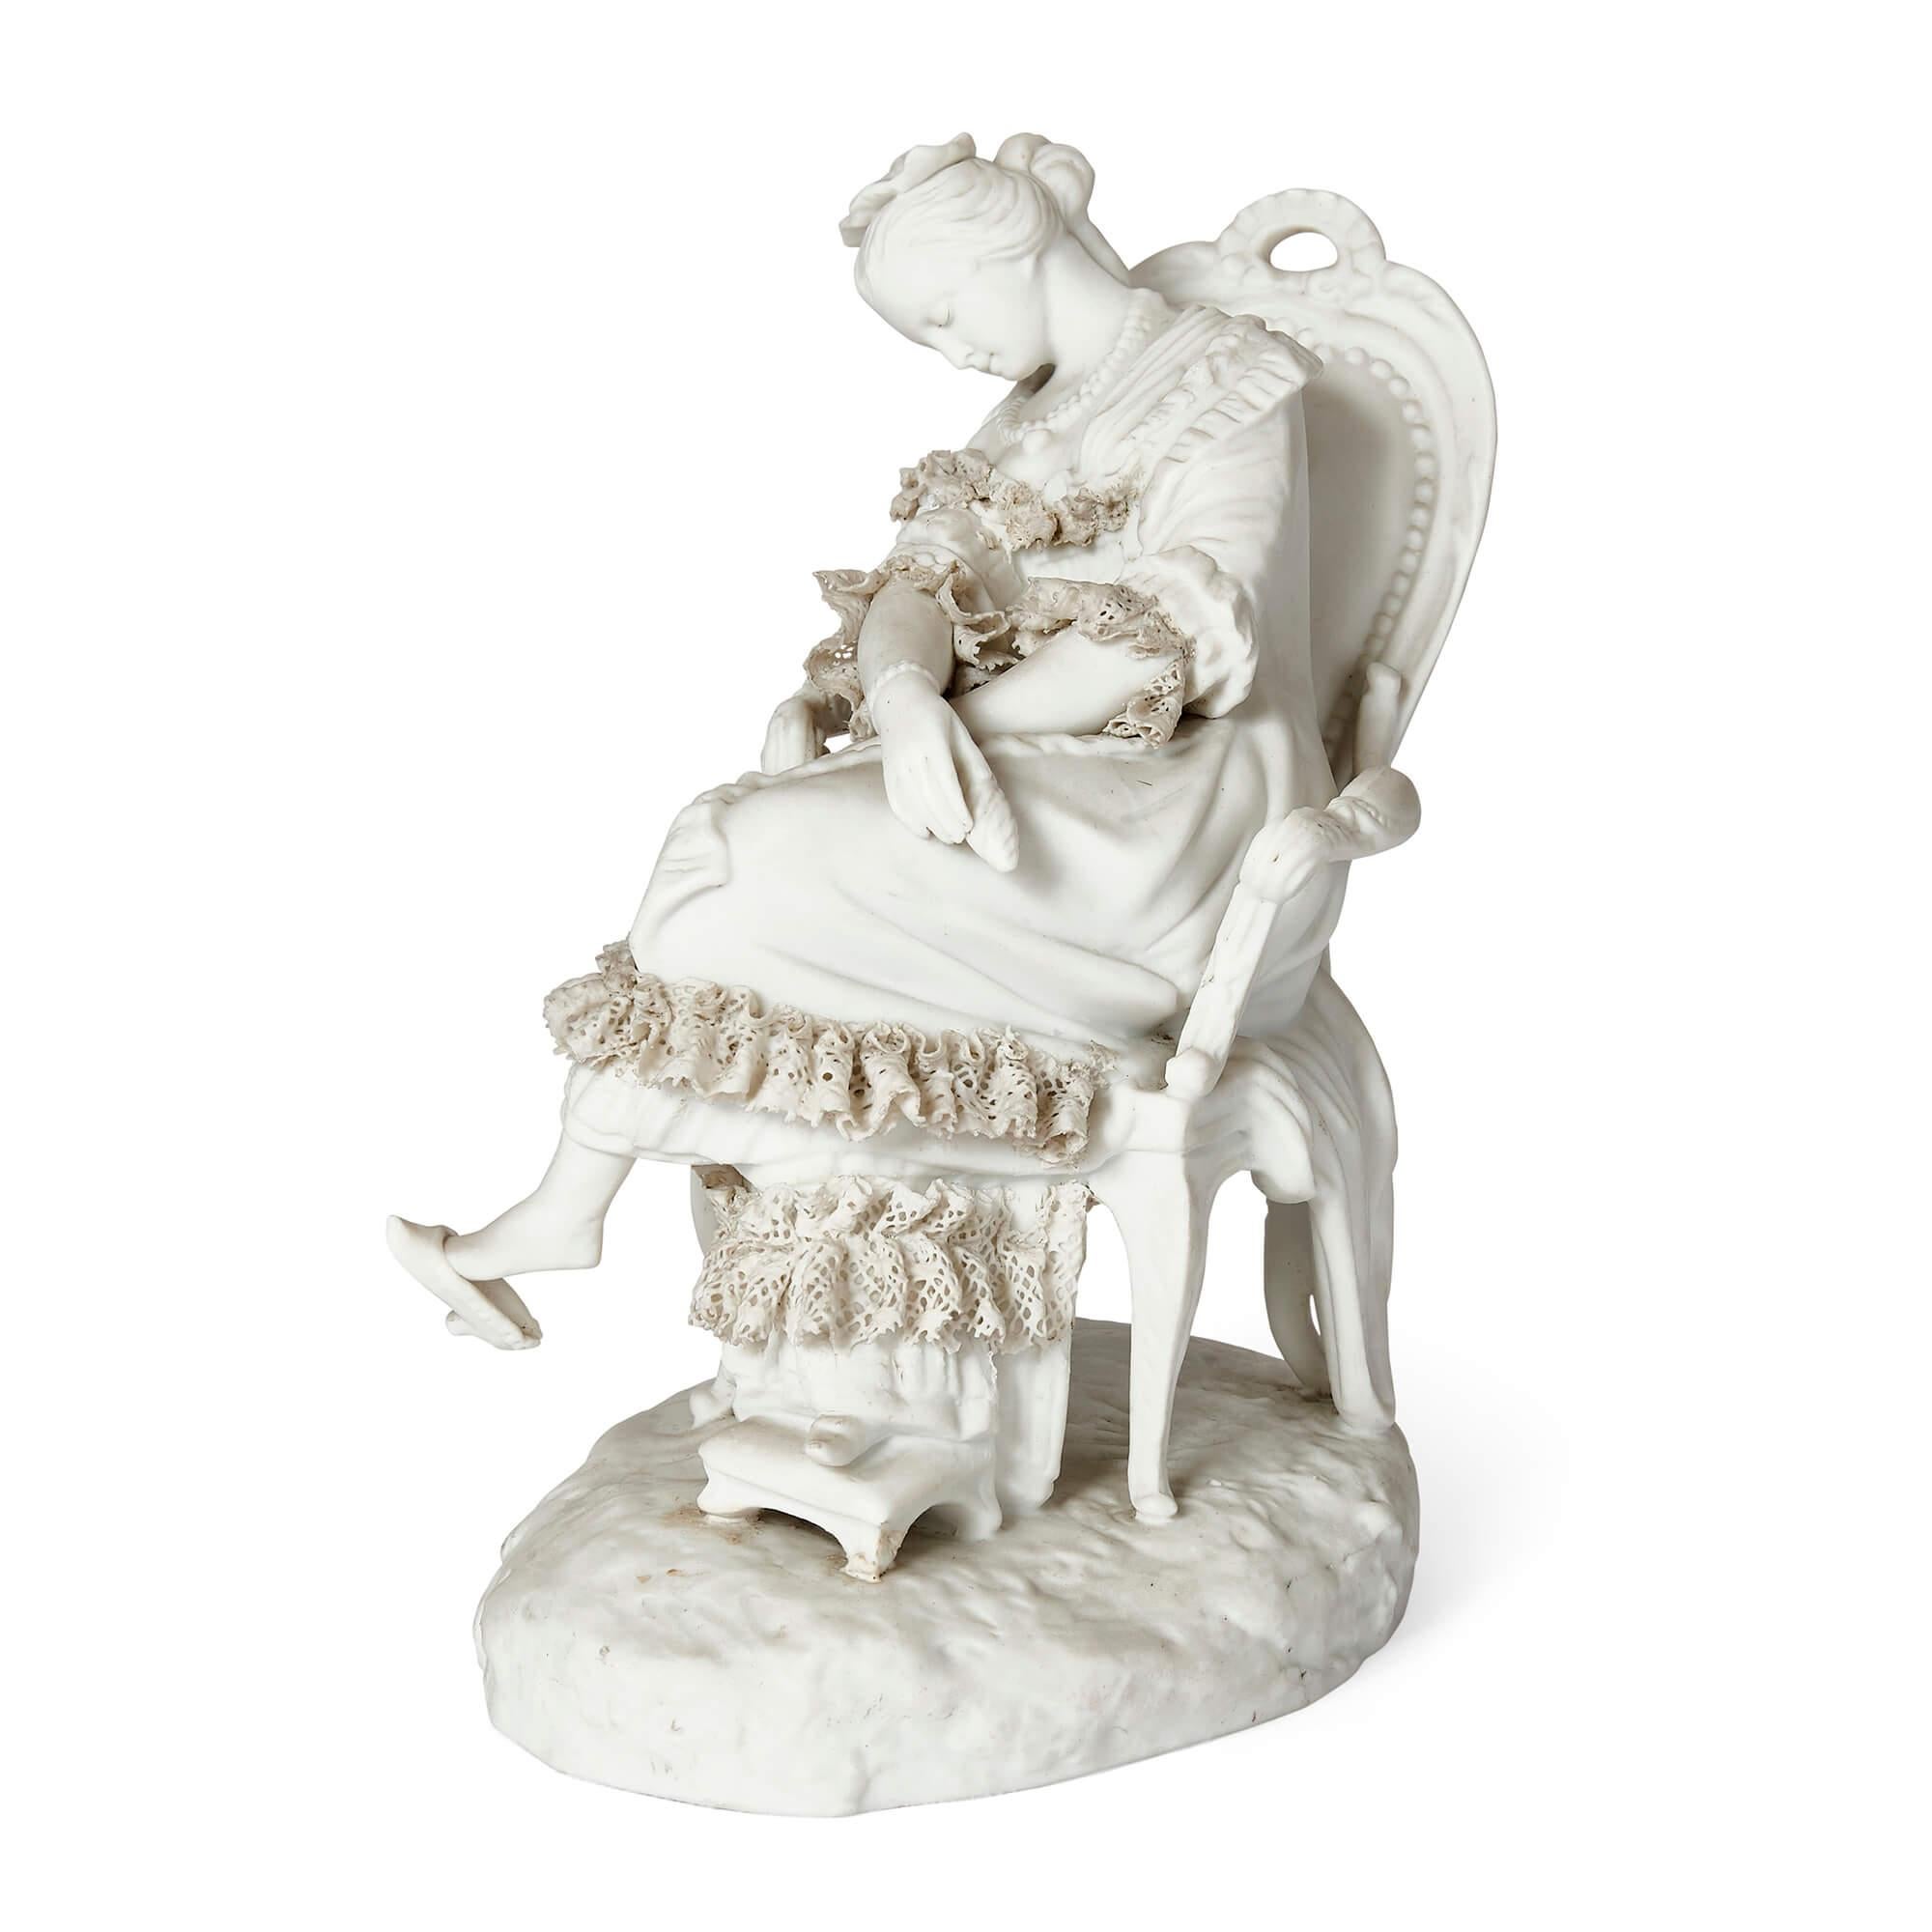 Pair of Rococo style bisque porcelain female figures
French, late 19th century
One figure: Height 19cm, width 14cm, depth 10cm
Other figure: Height 17cm, width 14cm, depth 10cm

These charming Rococo style figures are crafted from bisque